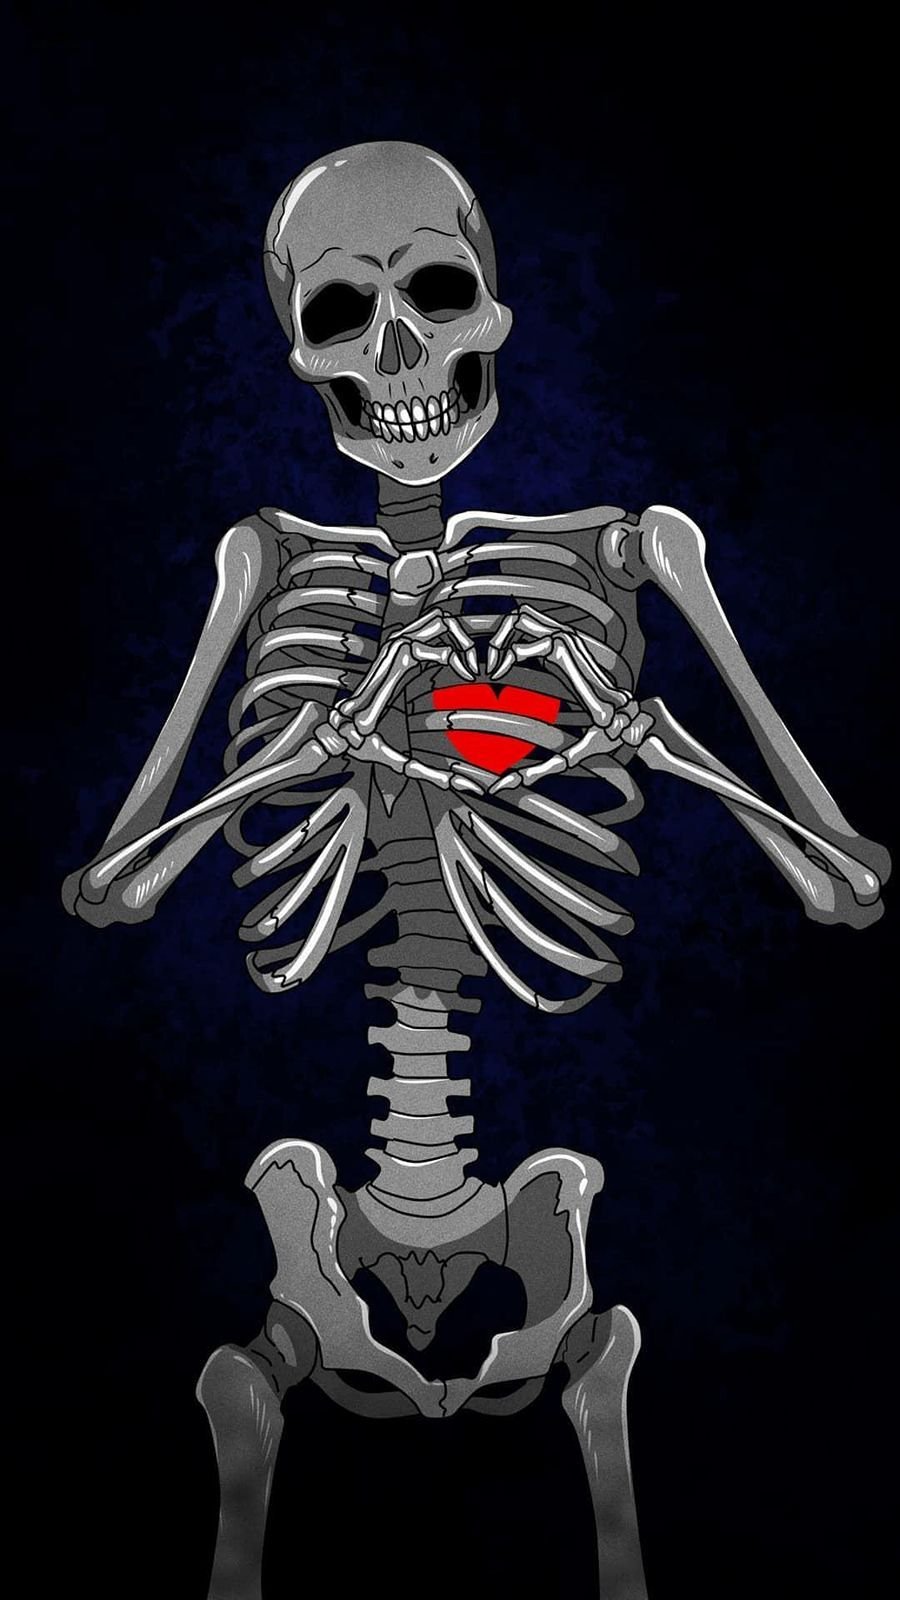 Skeleton with red heart